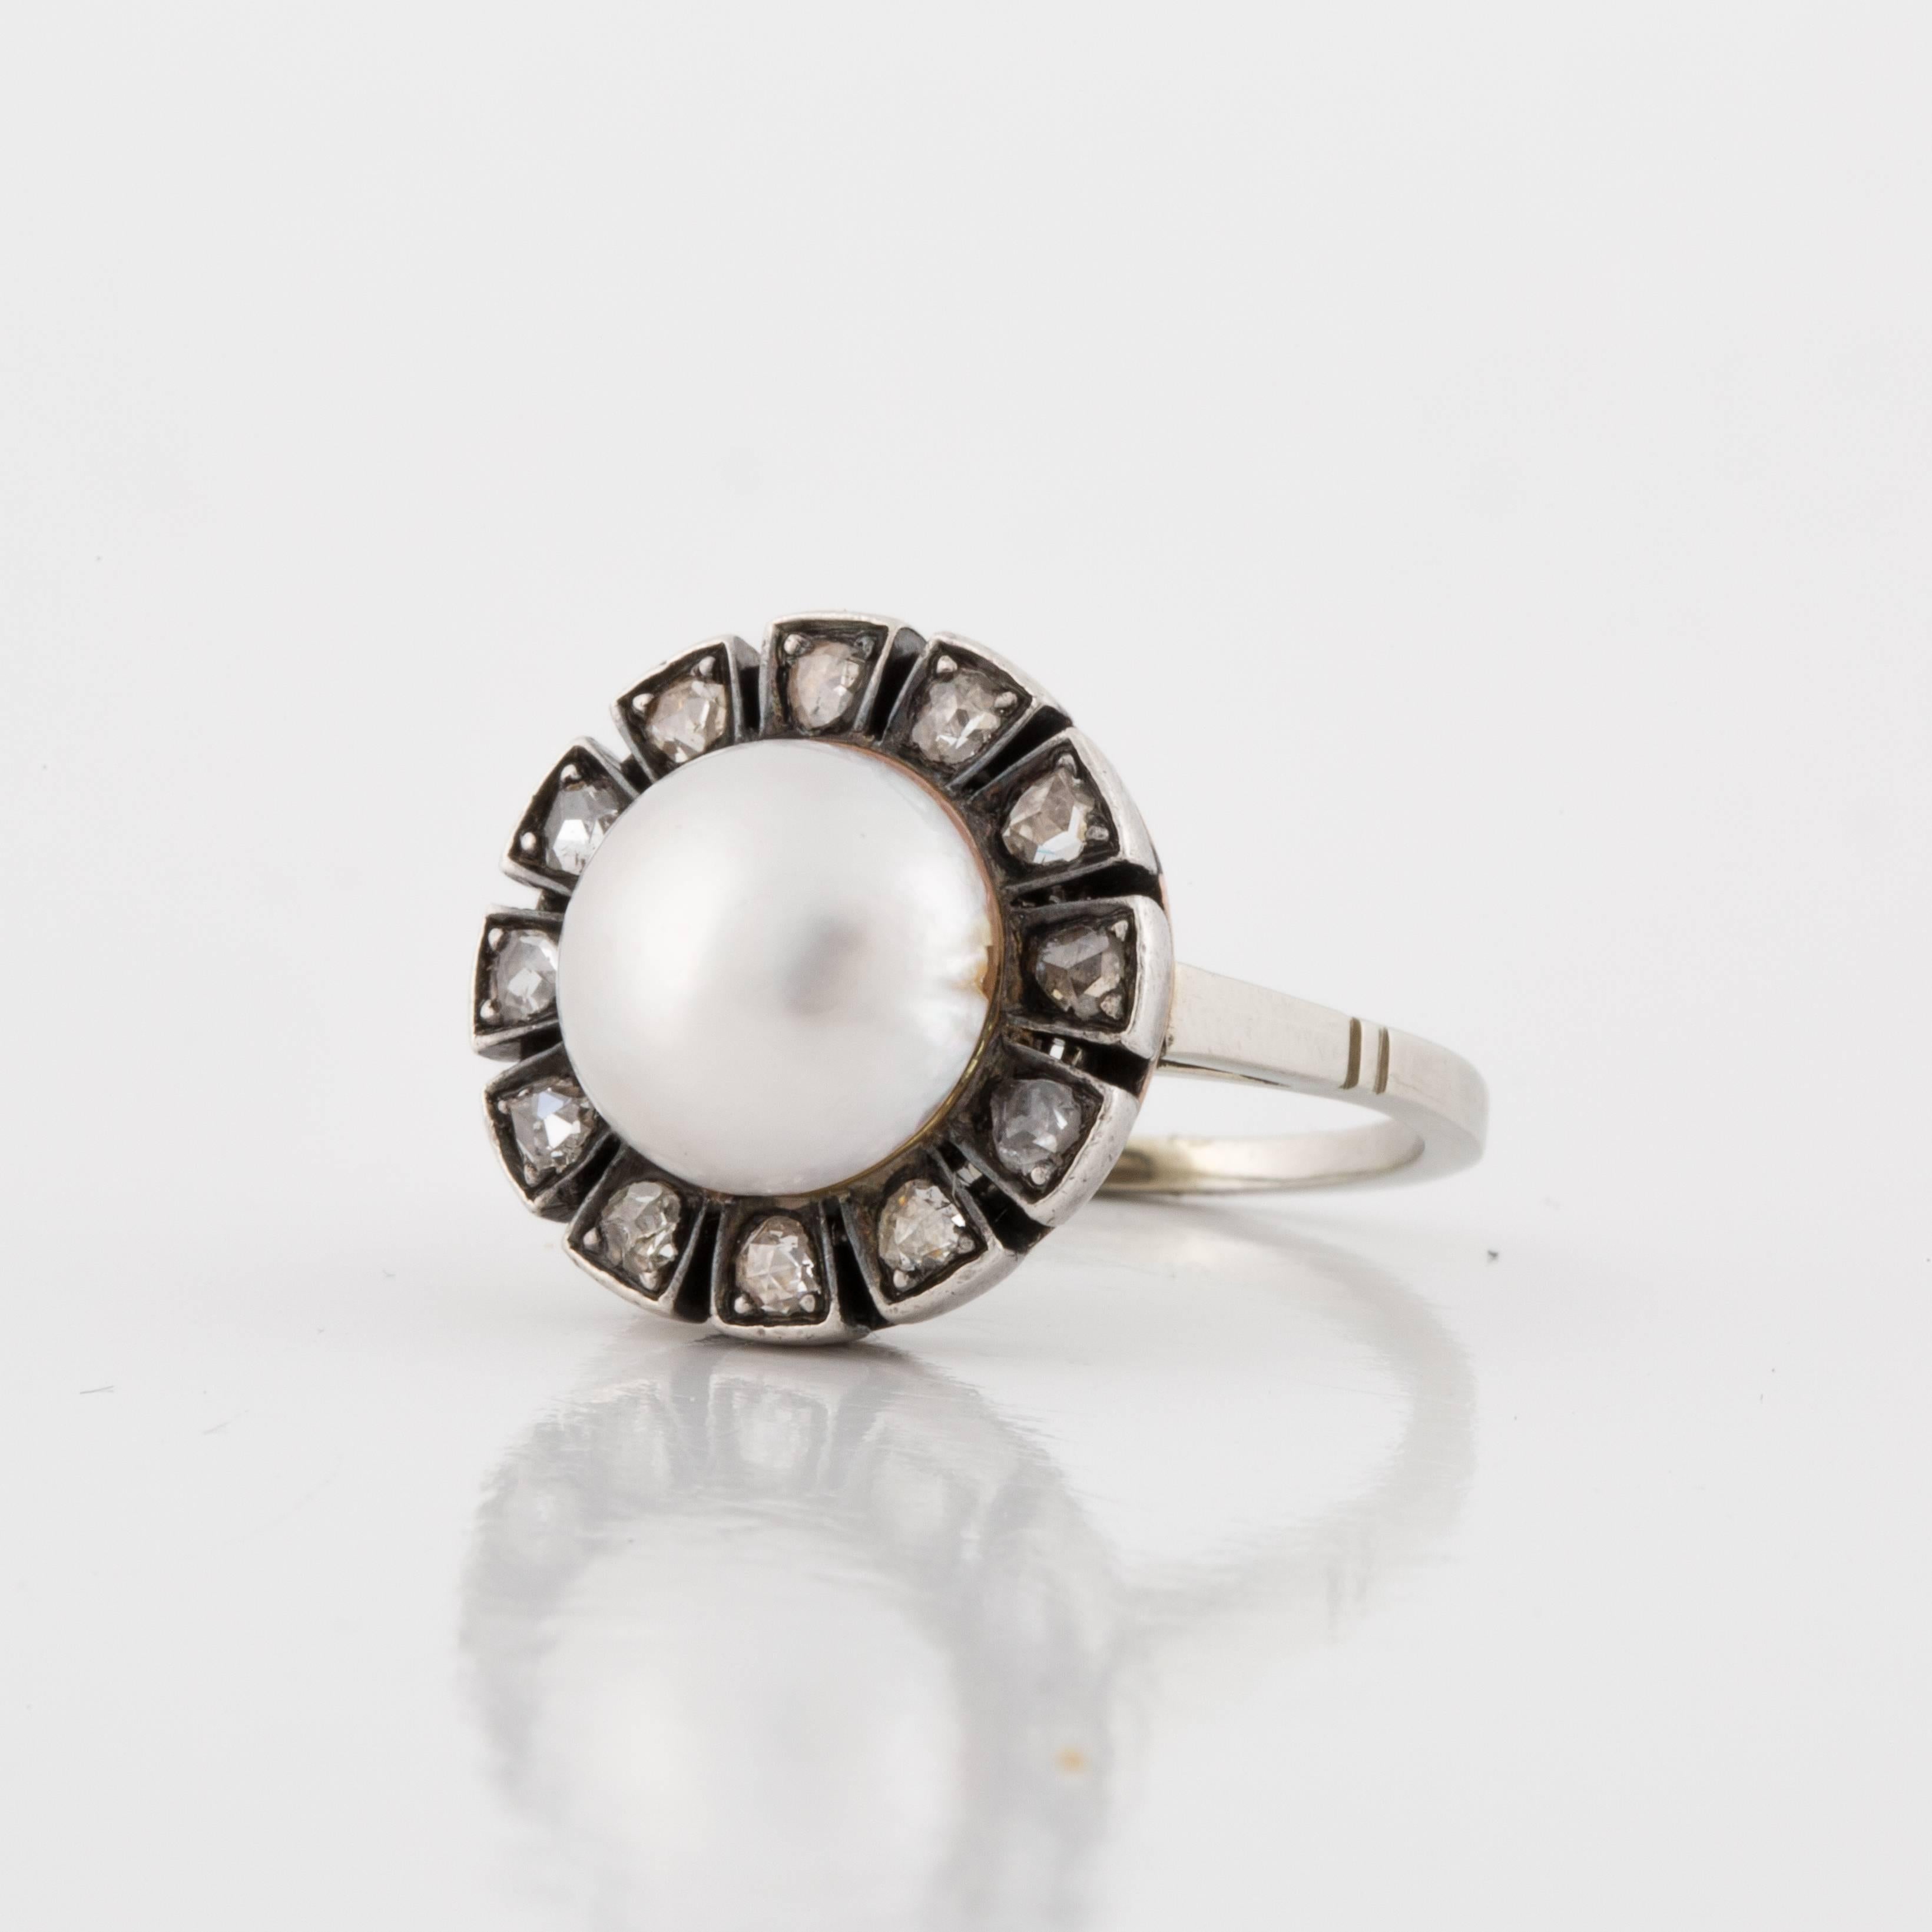 Mabe' pearl diamond ring from the 1930's.  Features a Mabe' pearl in the center surrounded by twelve (12) rose cut diamonds.  Ring is a size 5-3/4 and it measures 5/8